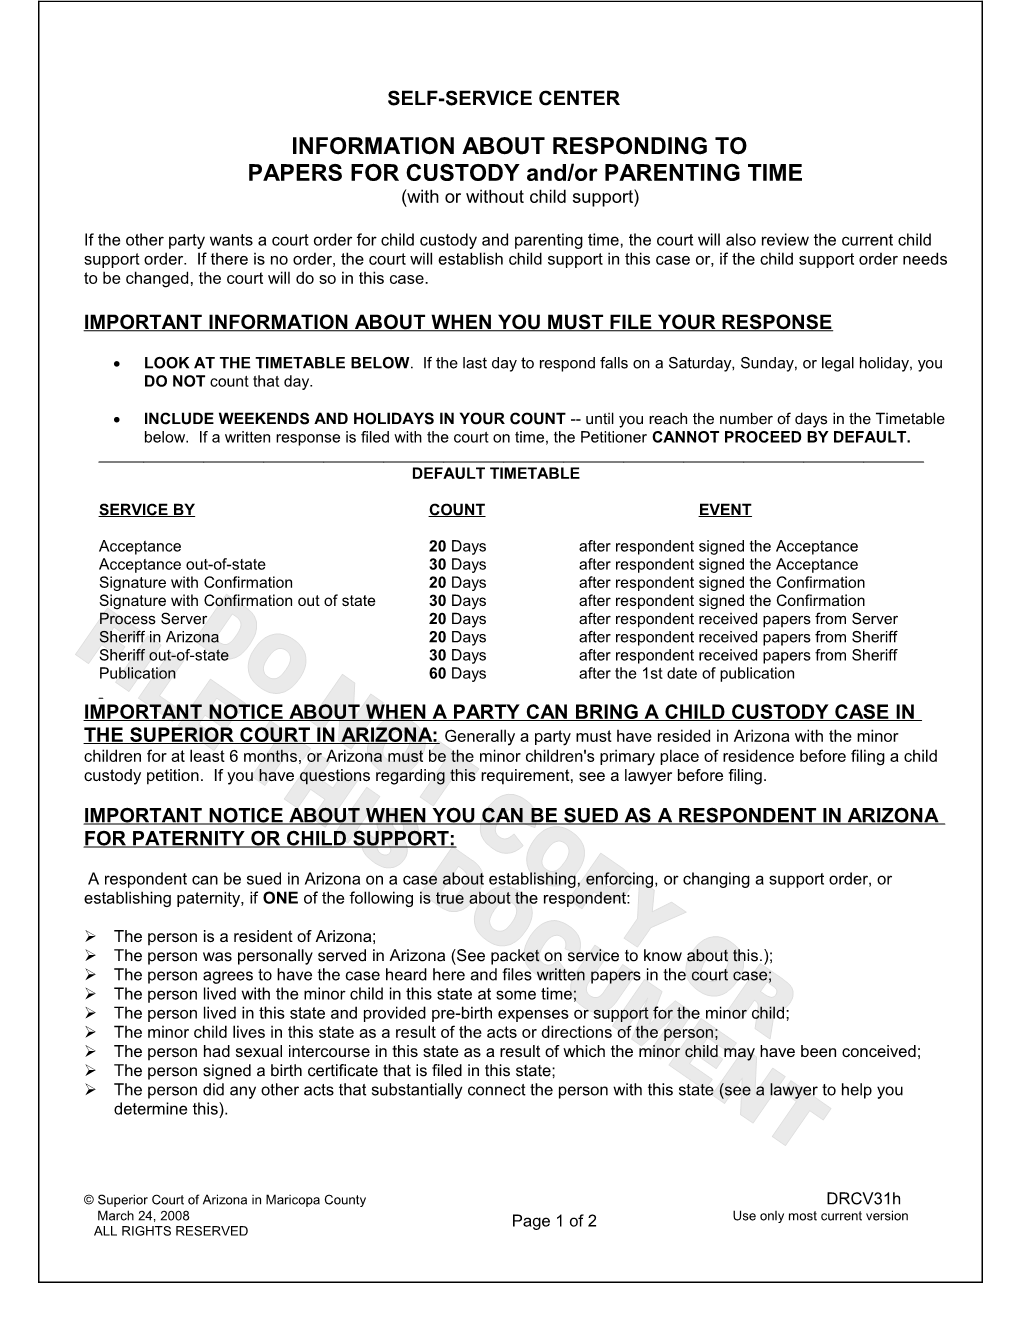 PAPERS for CUSTODY And/Or PARENTING TIME